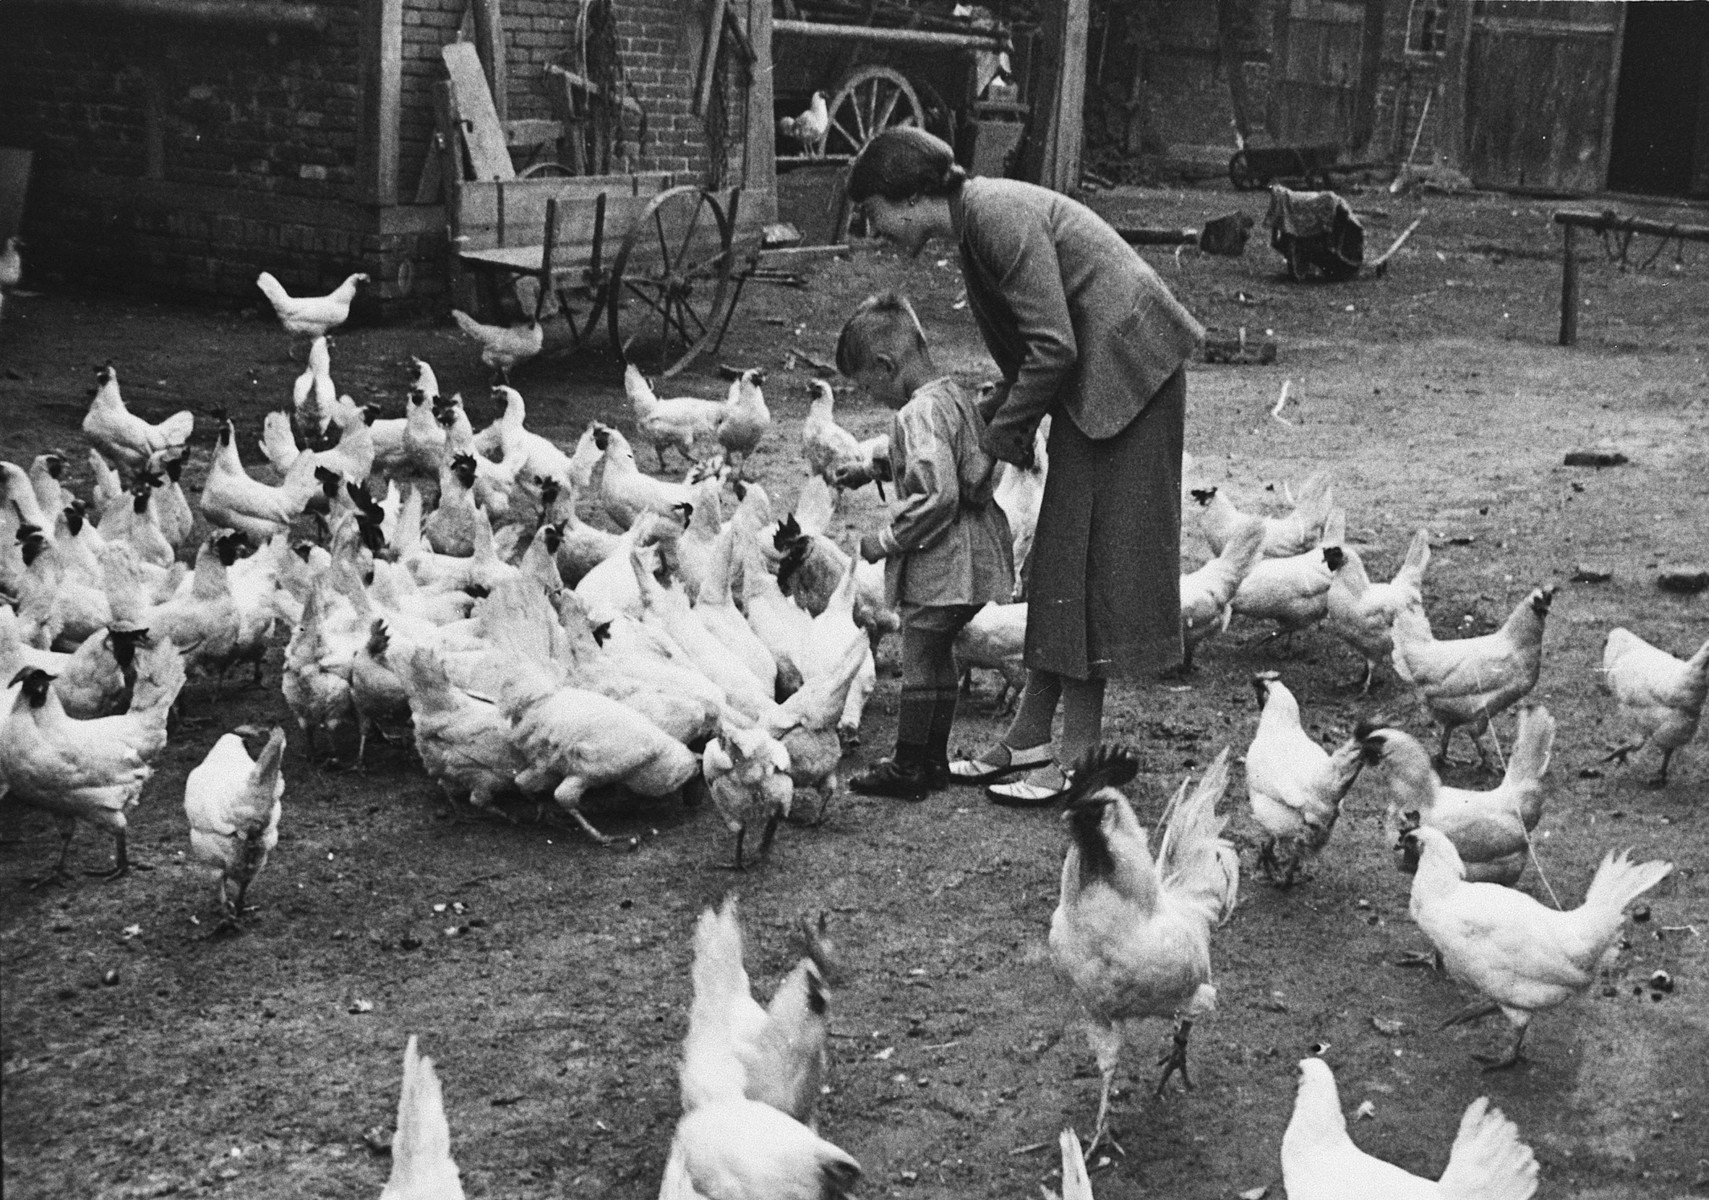 A German-Jewish mother helps her young son feed chickens on a farm.

Pictured are Rolf Blumenthal and his mother Johanna Blumenthal in the yard of his paternal grandfather Julius Blumenthal's business.